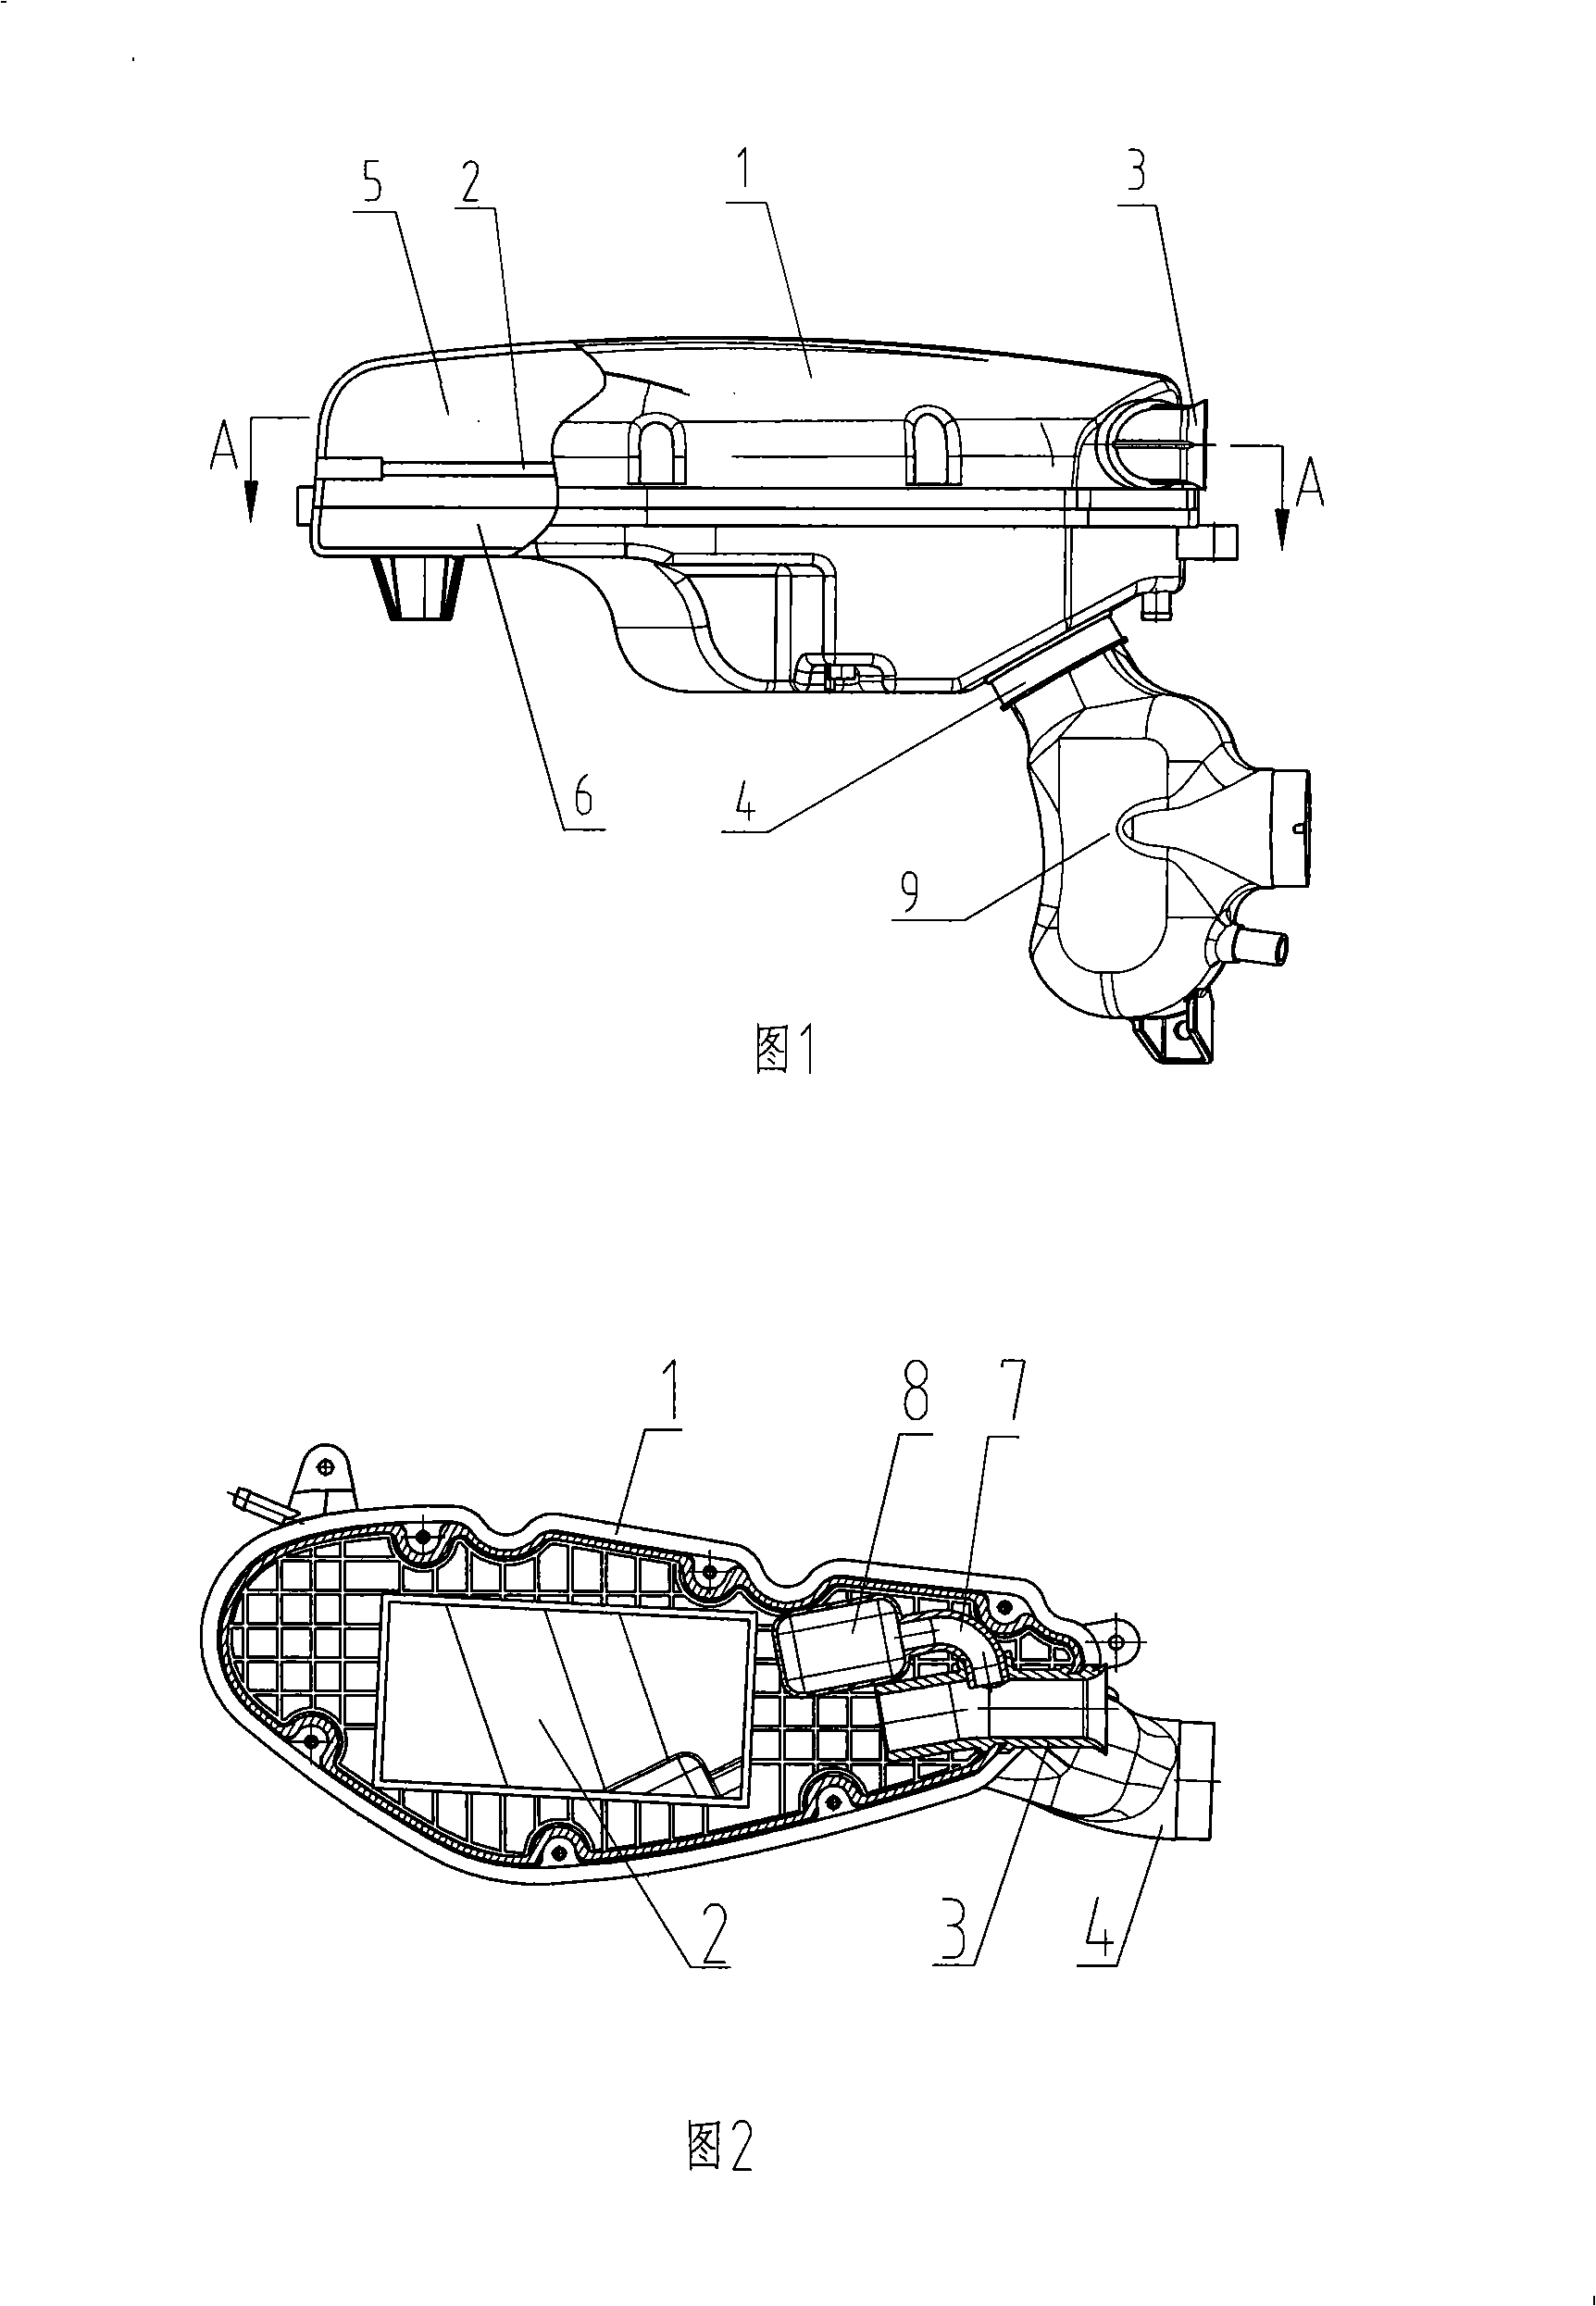 Air-intake noise-reduction air filter for vehicle